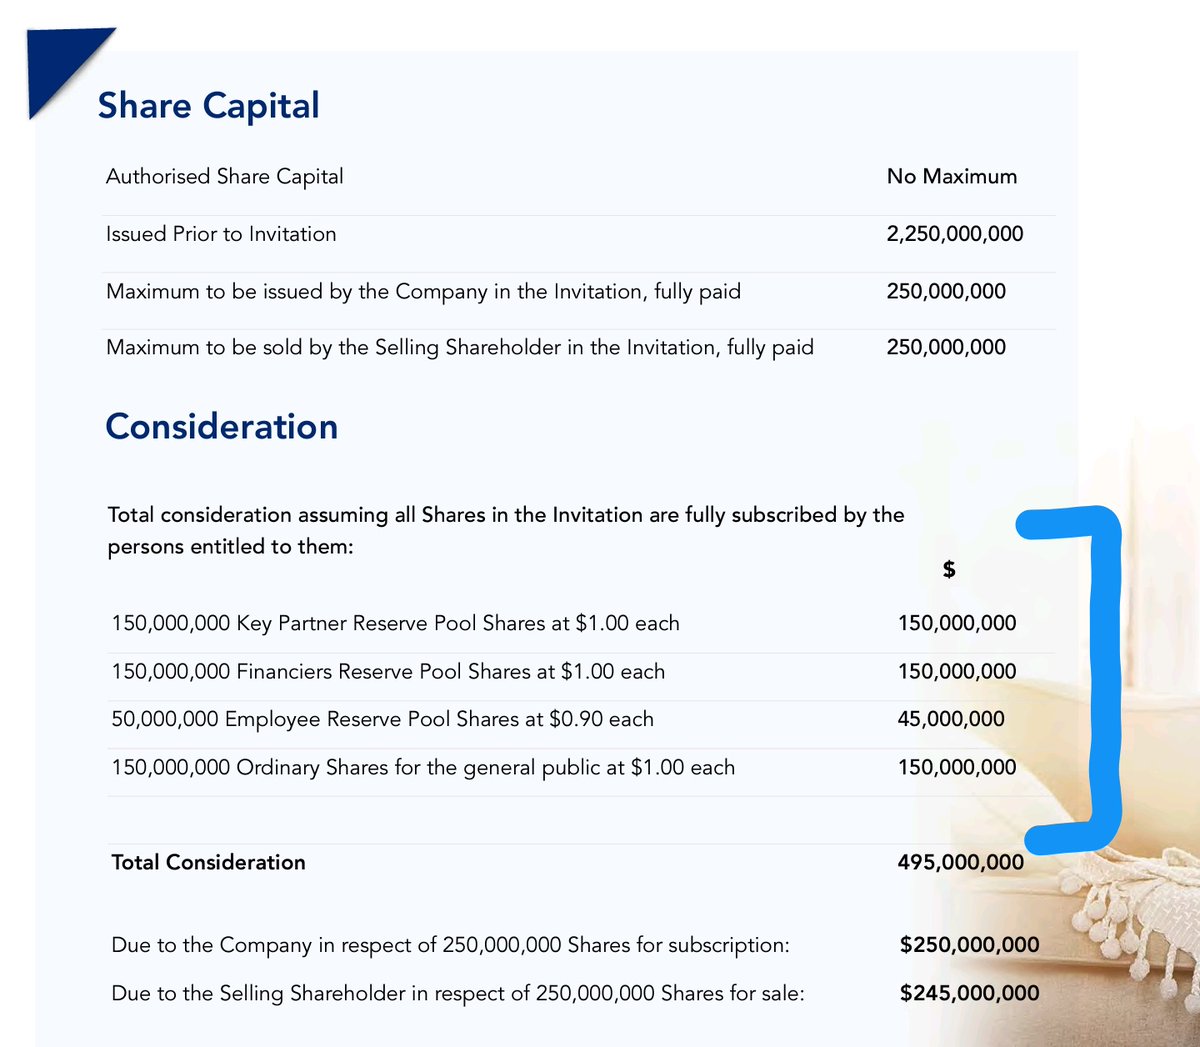 Breakdown of share invitation can be seen below. Only 30% of the shares being sold will go to the general public. That's $150M to be split being thousands of potential investors who were anticipating this. If participation is high, allocations are likely to be low.